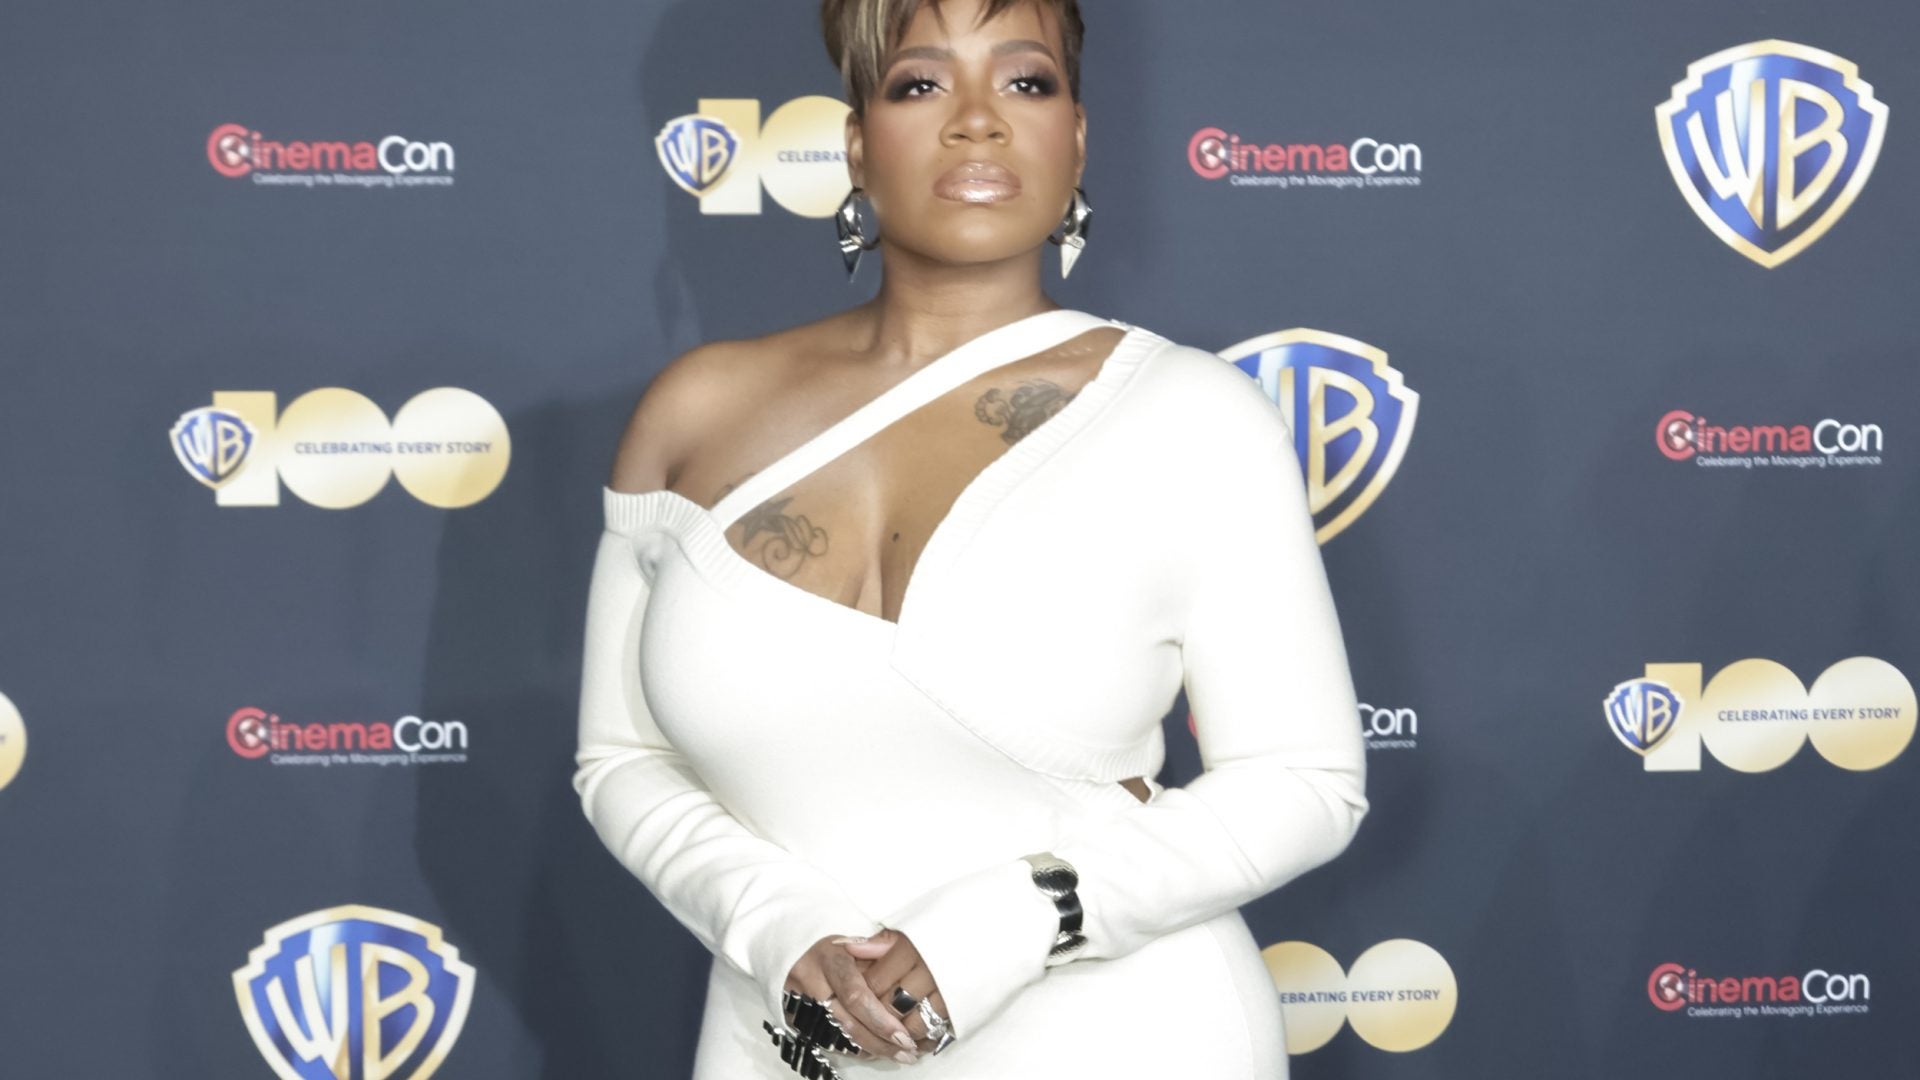 Get The Look: Fantasia's White Knit Dress